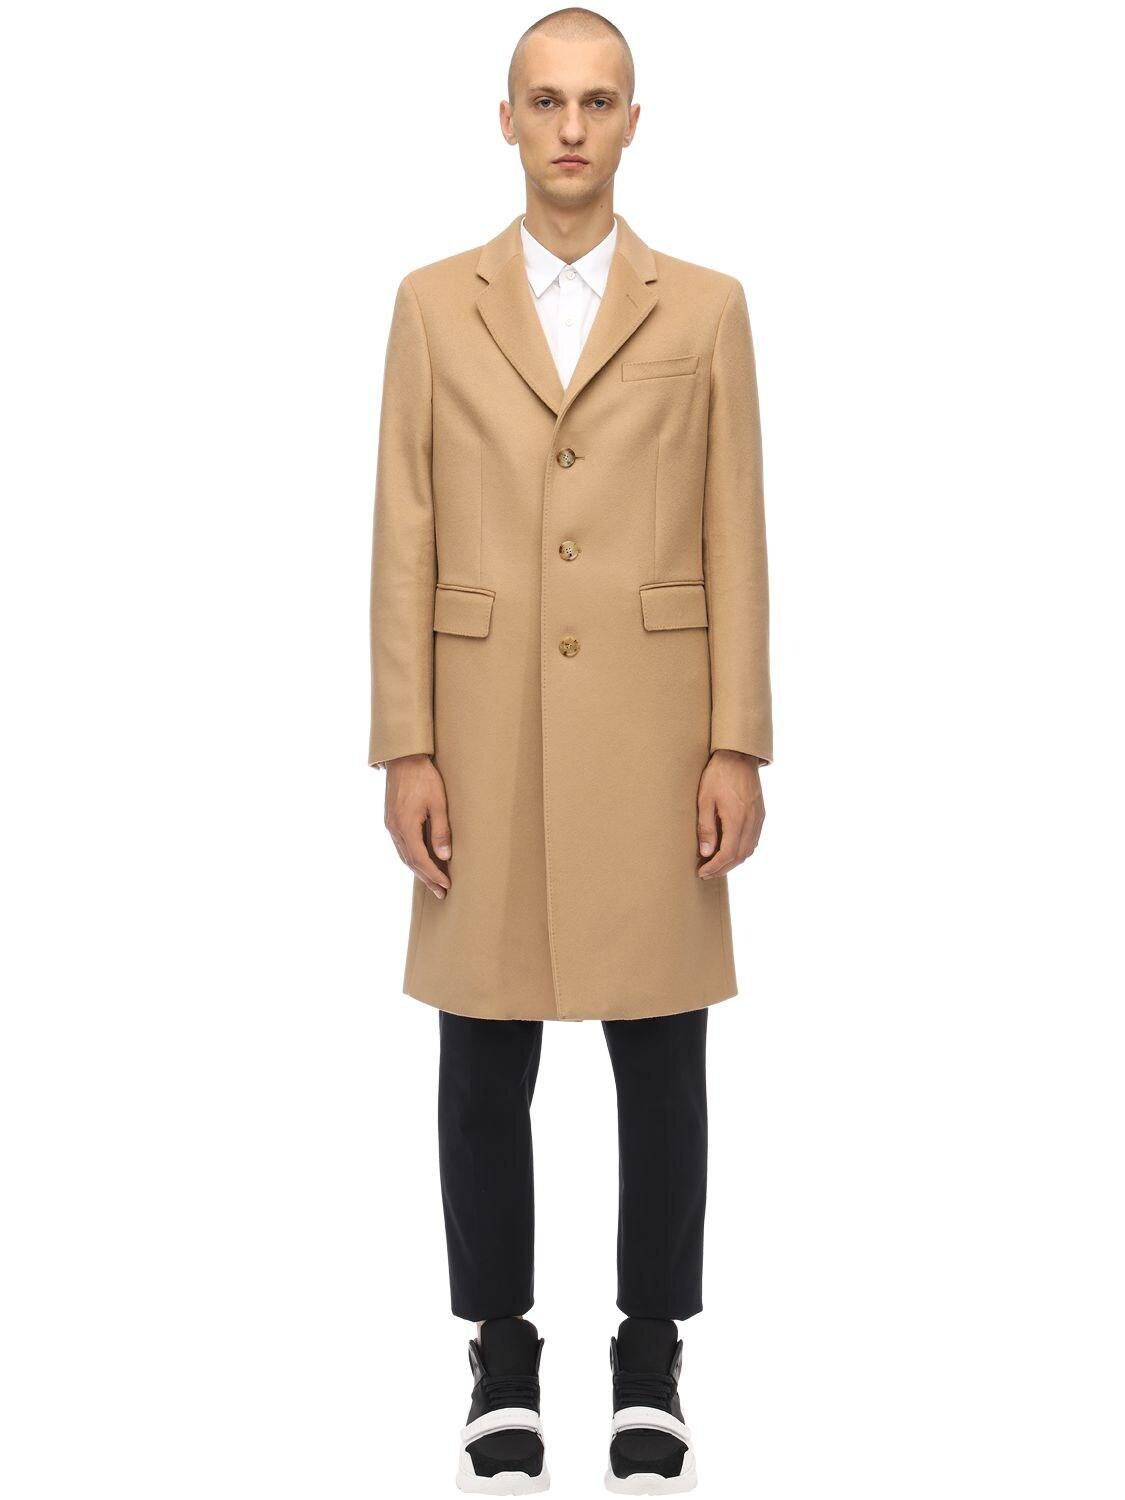 Burberry Single Breast Wool & Cashmere Coat in Camel (Natural) for Men -  Lyst